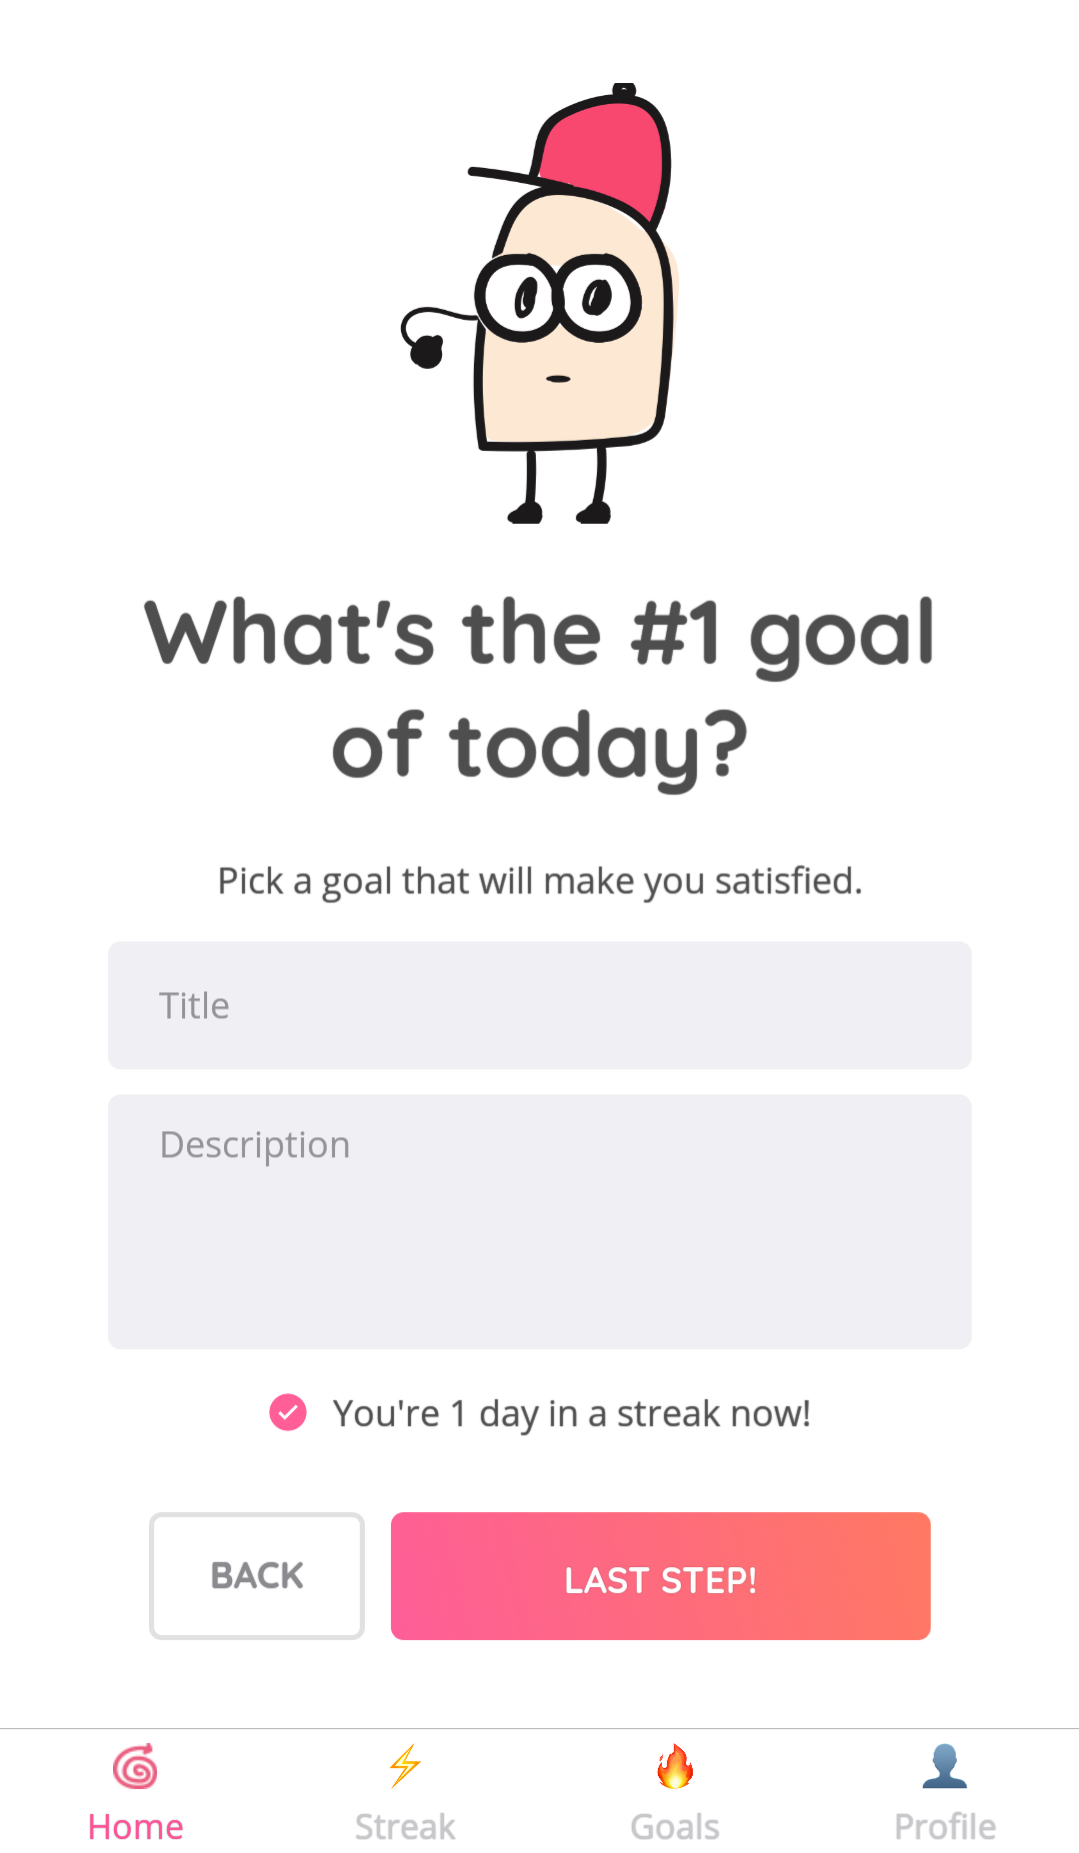 Streaky lets you set a Chain of Goal-Finishing Days